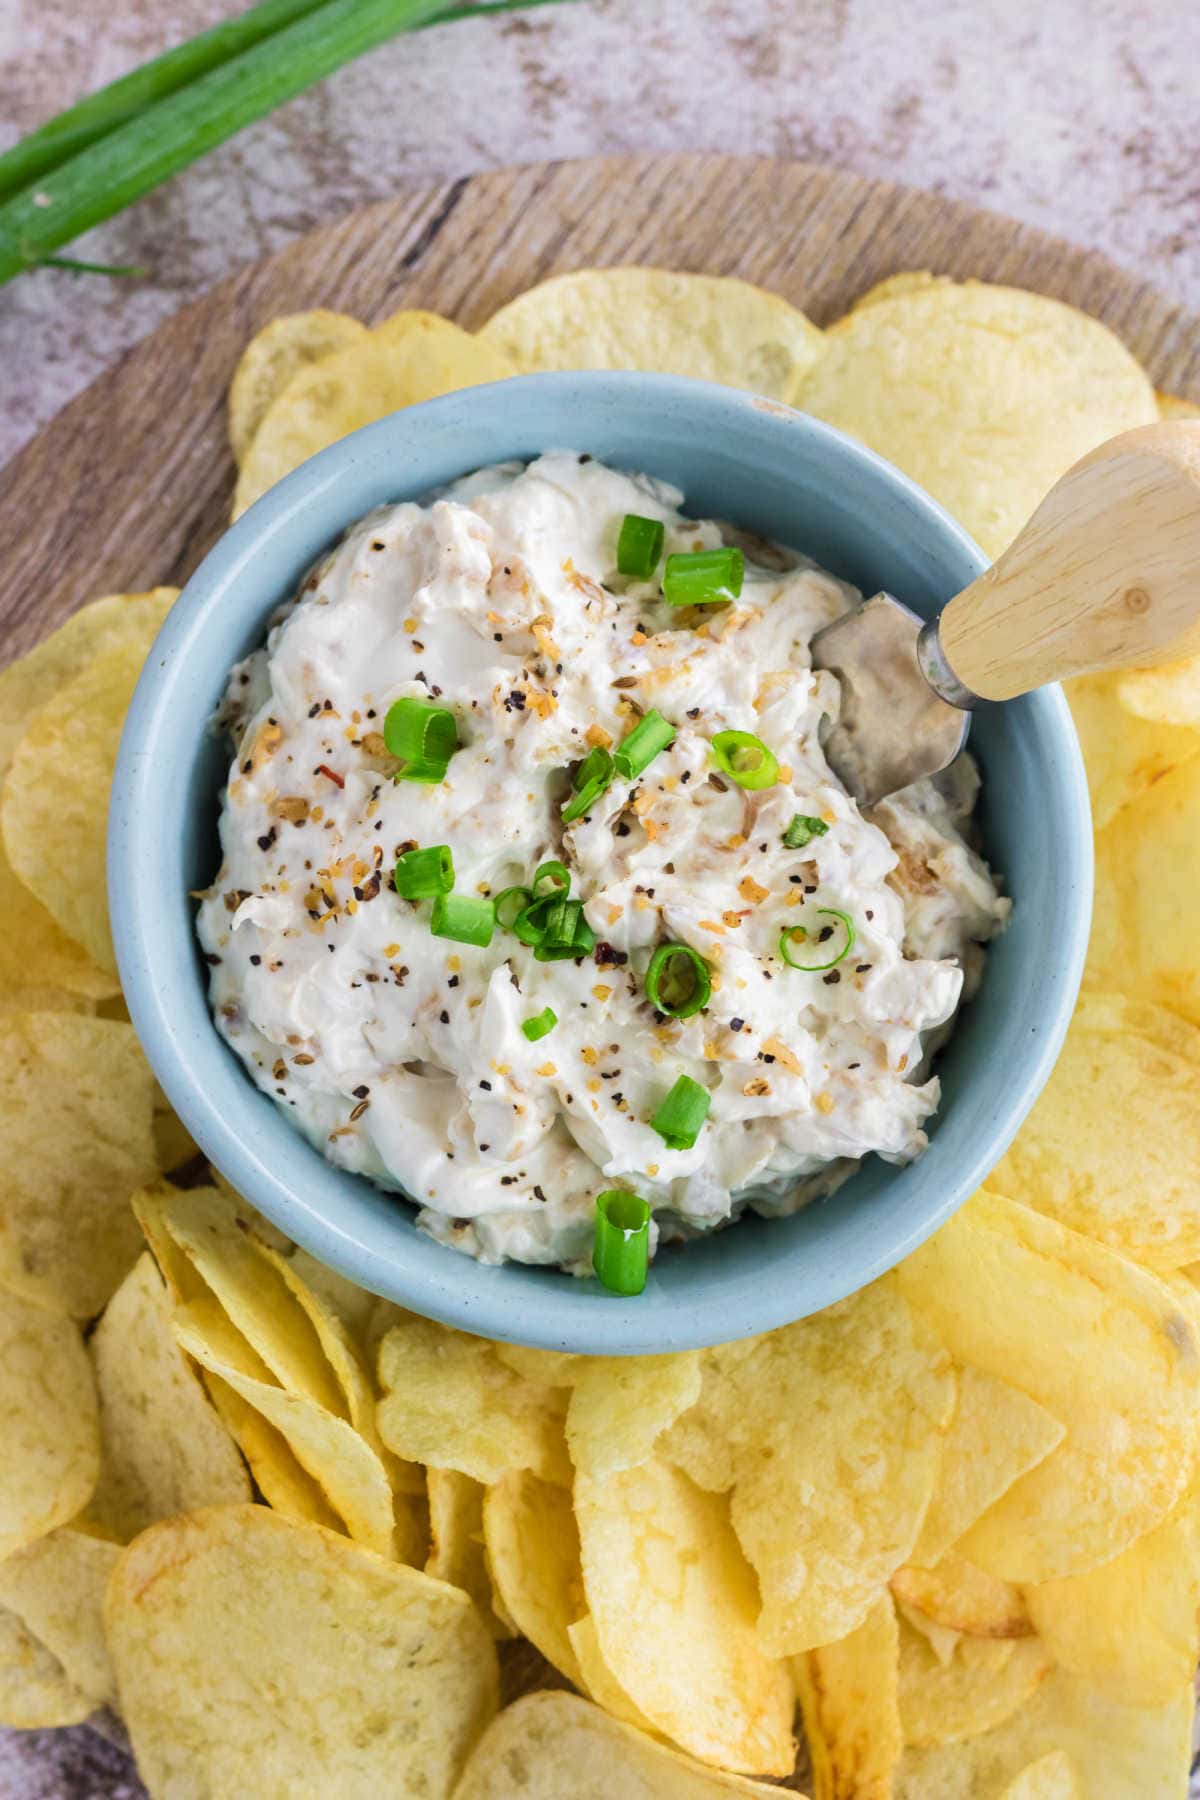 Overhead view of onion dip in a blue bowl garnished with green onions.